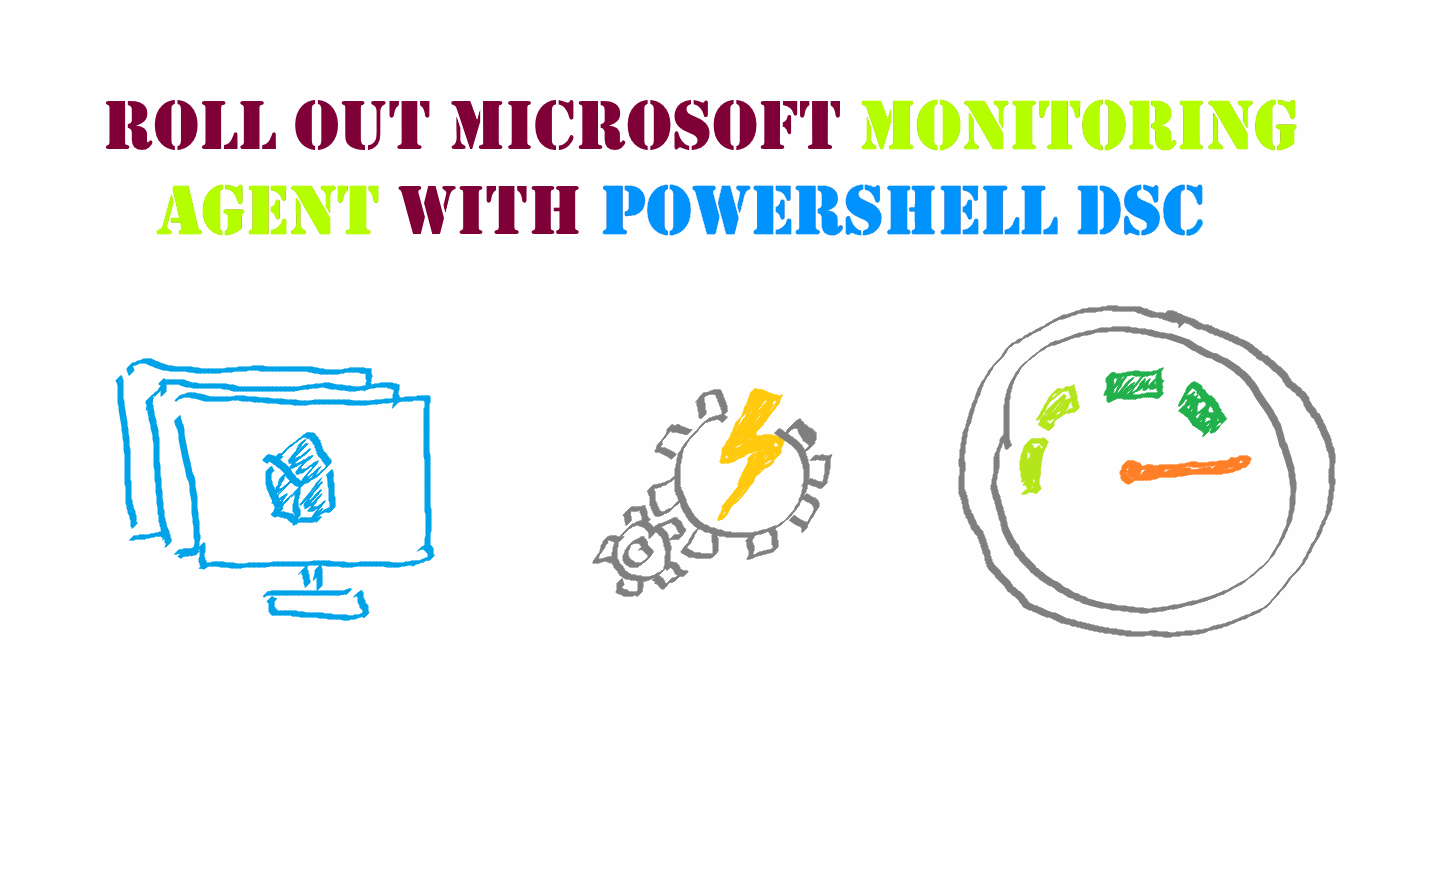 How to roll out Microsoft Monitoring Agent with PowerShell DSC